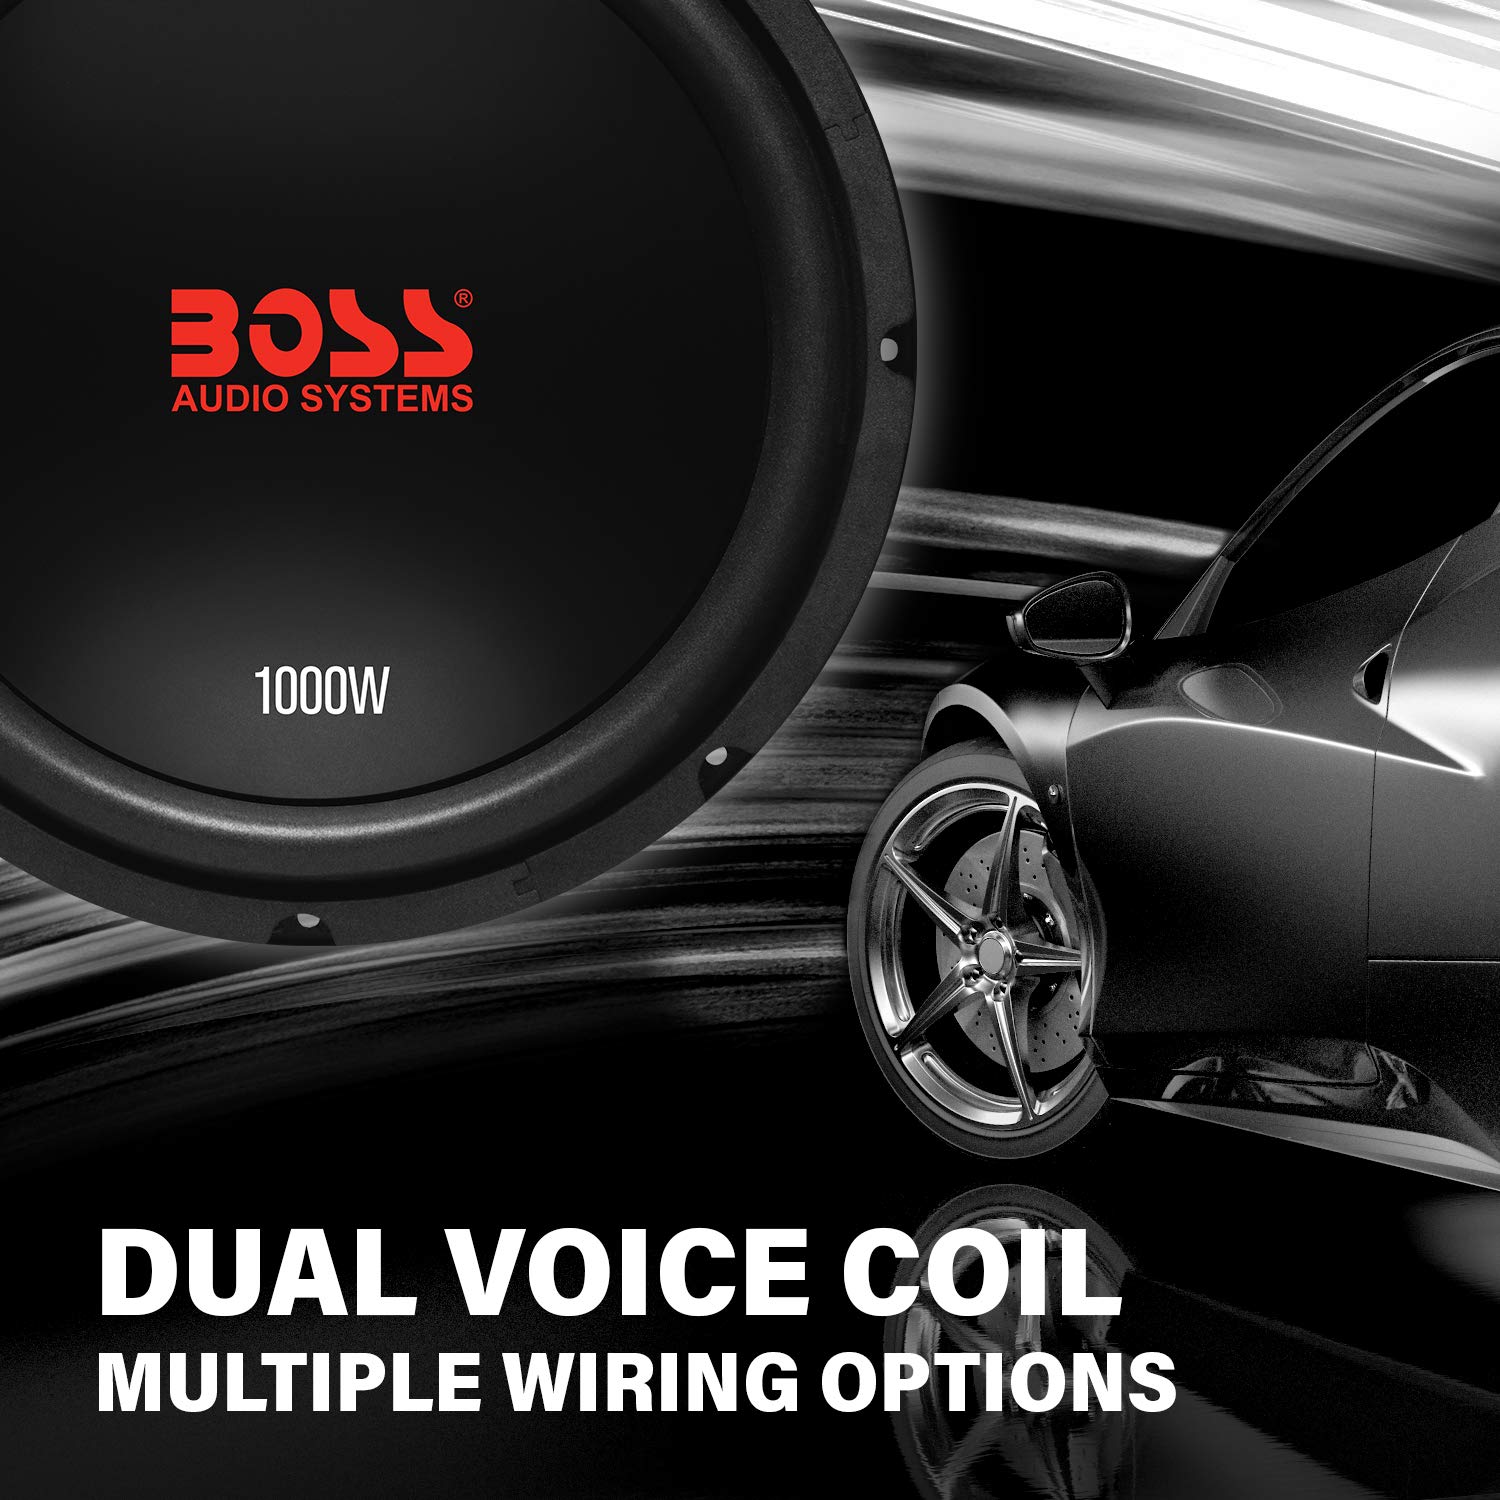 BOSS Audio Systems CXX104DVC Car Subwoofer - 1000 Watts Maximum Power, 10 Inch, Dual 4 Ohm Voice Coil, Sold Individually